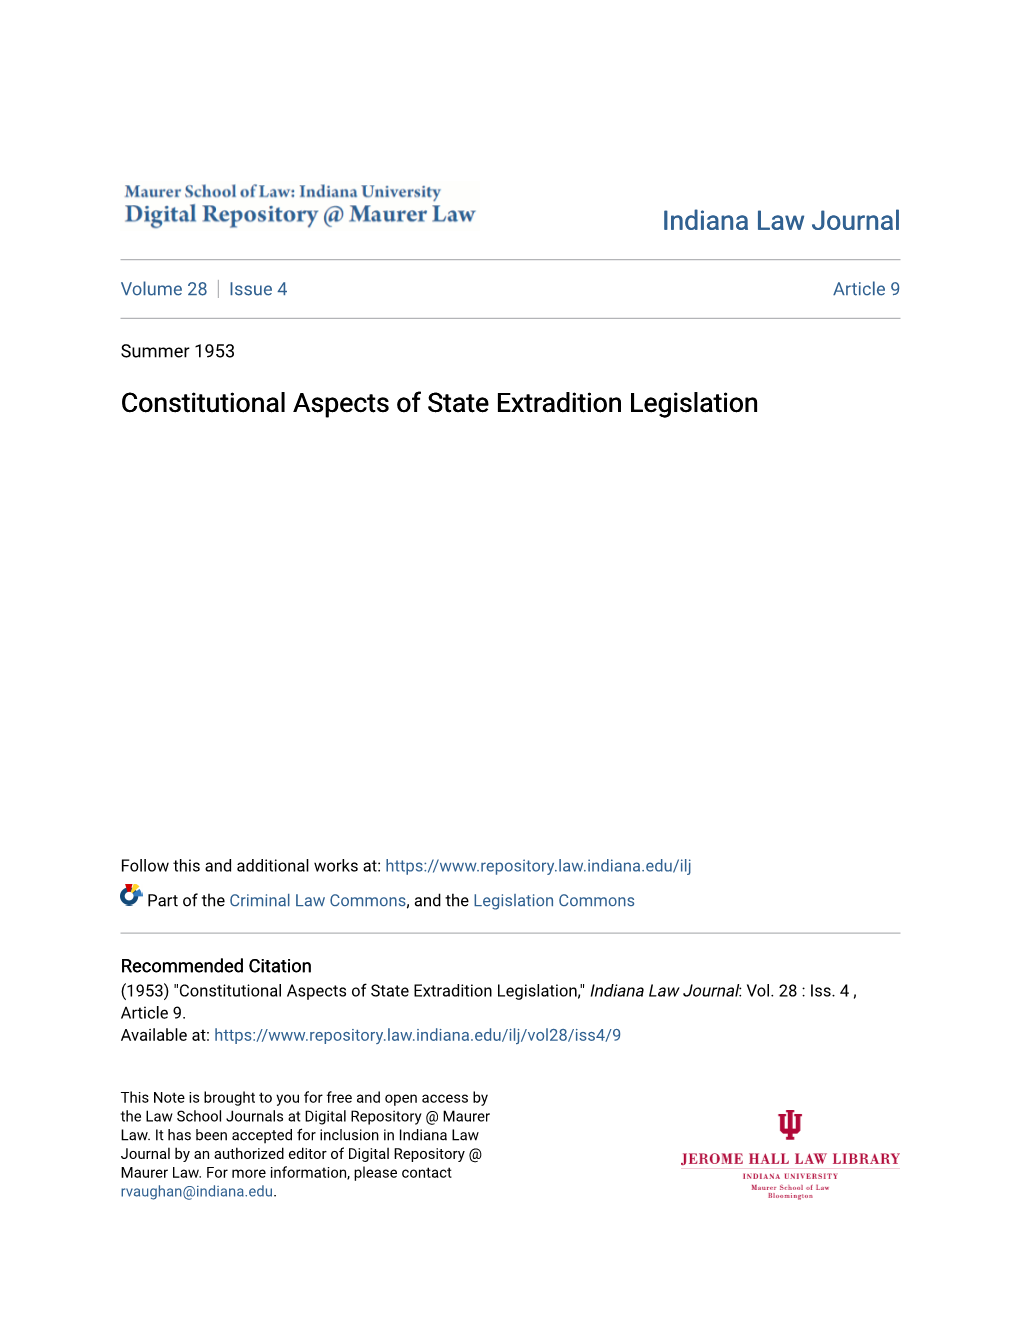 Constitutional Aspects of State Extradition Legislation